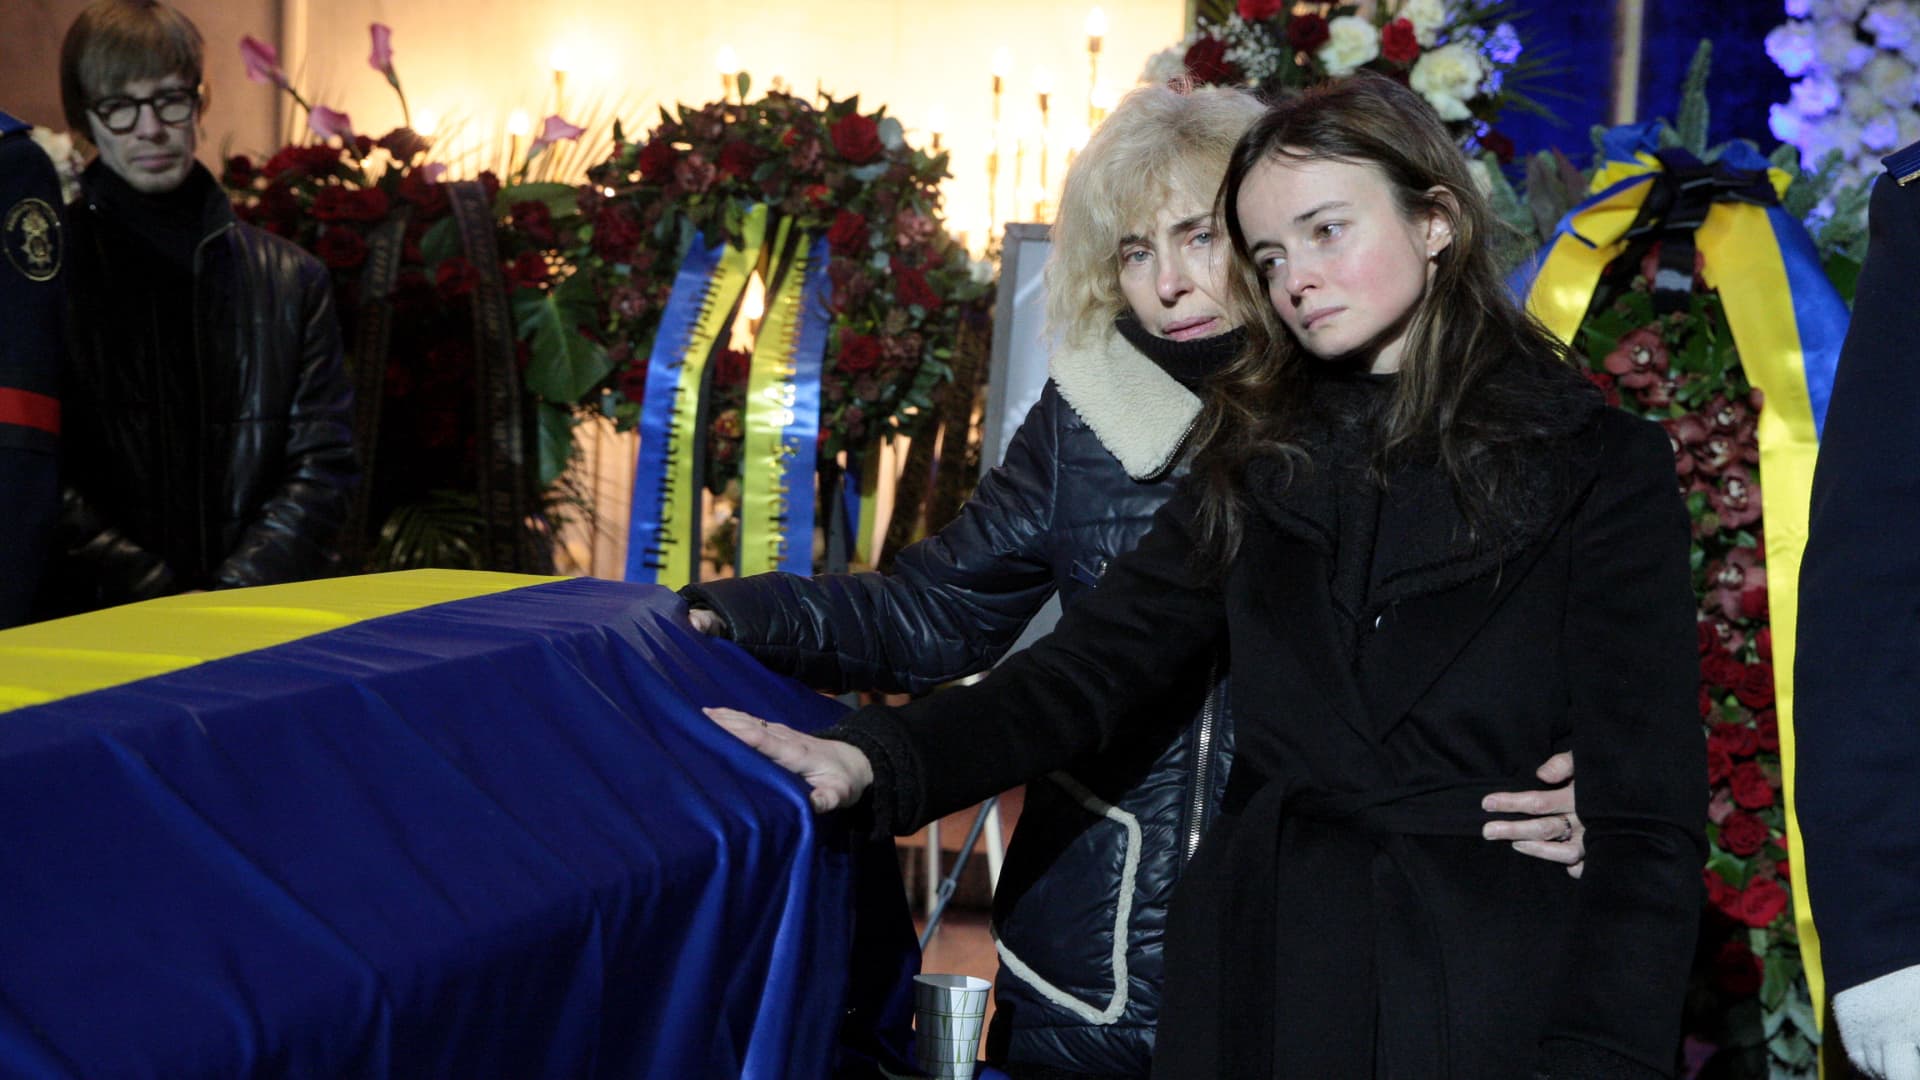 Relatives mourn late First Deputy Minister of Internal Affairs of Ukraine Yevhenii Yenin during the lying-in-state ceremony of the leadership of the Ukrainian Ministry of Internal Affairs who perished in the Brovary helicopter crash at the Ukrainian House, Kyiv, capital of Ukraine.